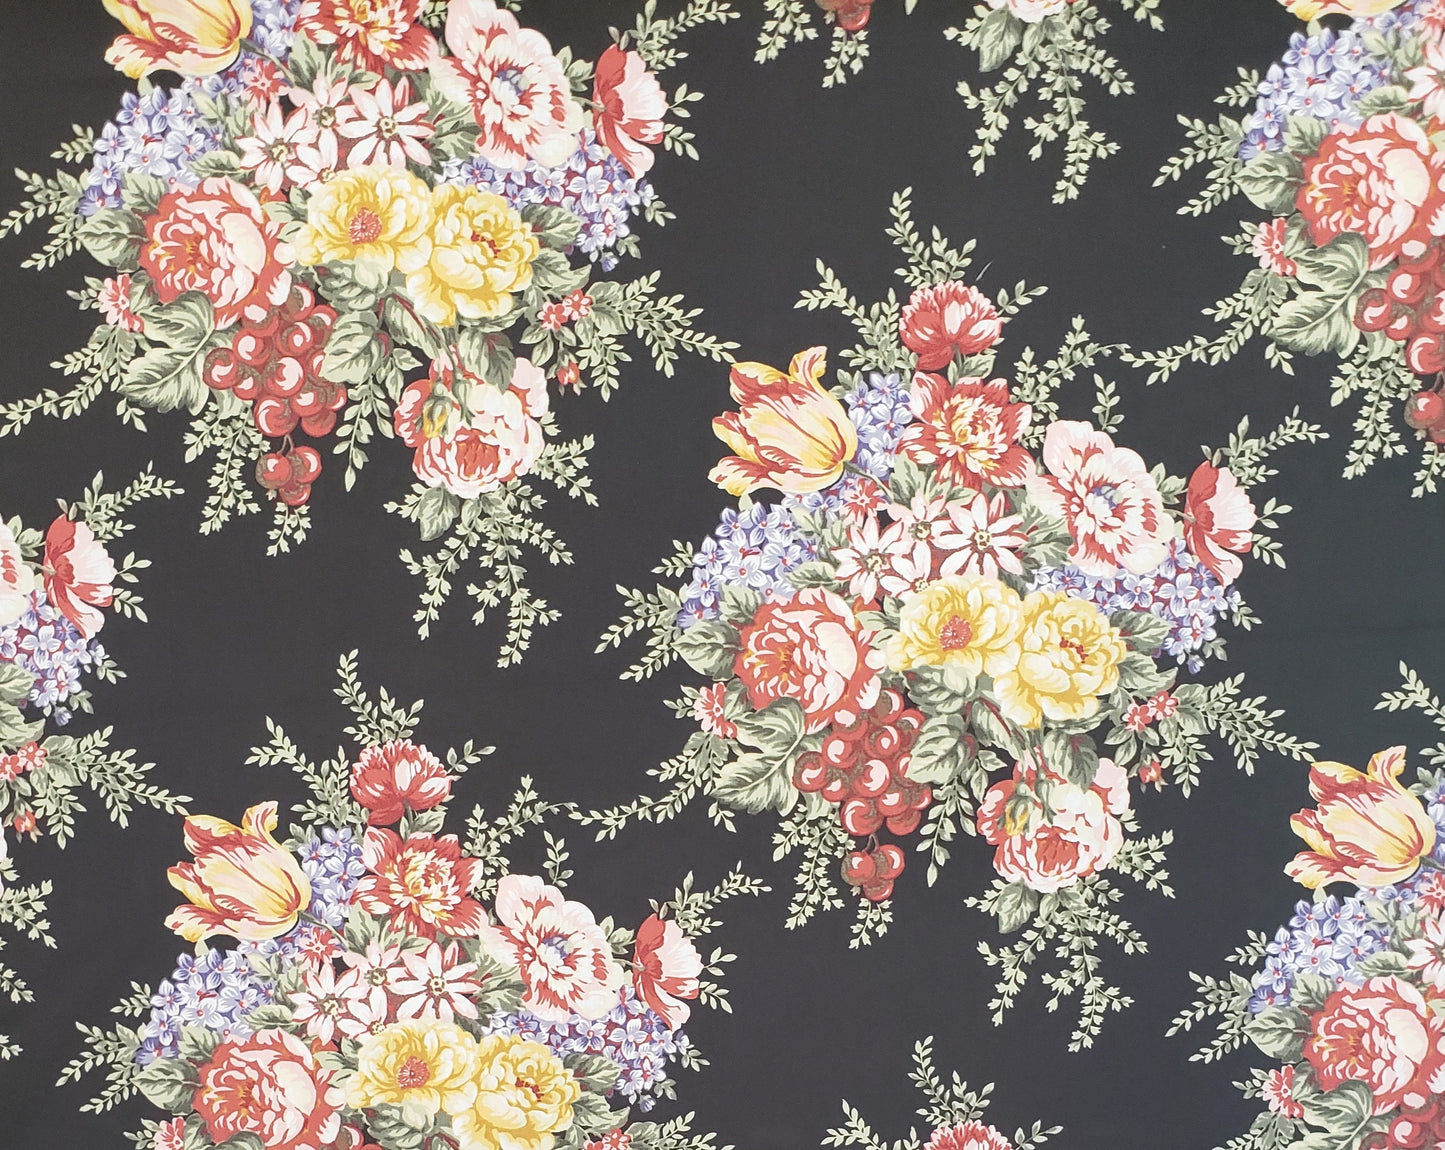 Floral Bouquets and Fancies by Sharon Yenter for In the Beginning Fabrics 2000 - Black Fabric / Multi-Color Floral Bouquet